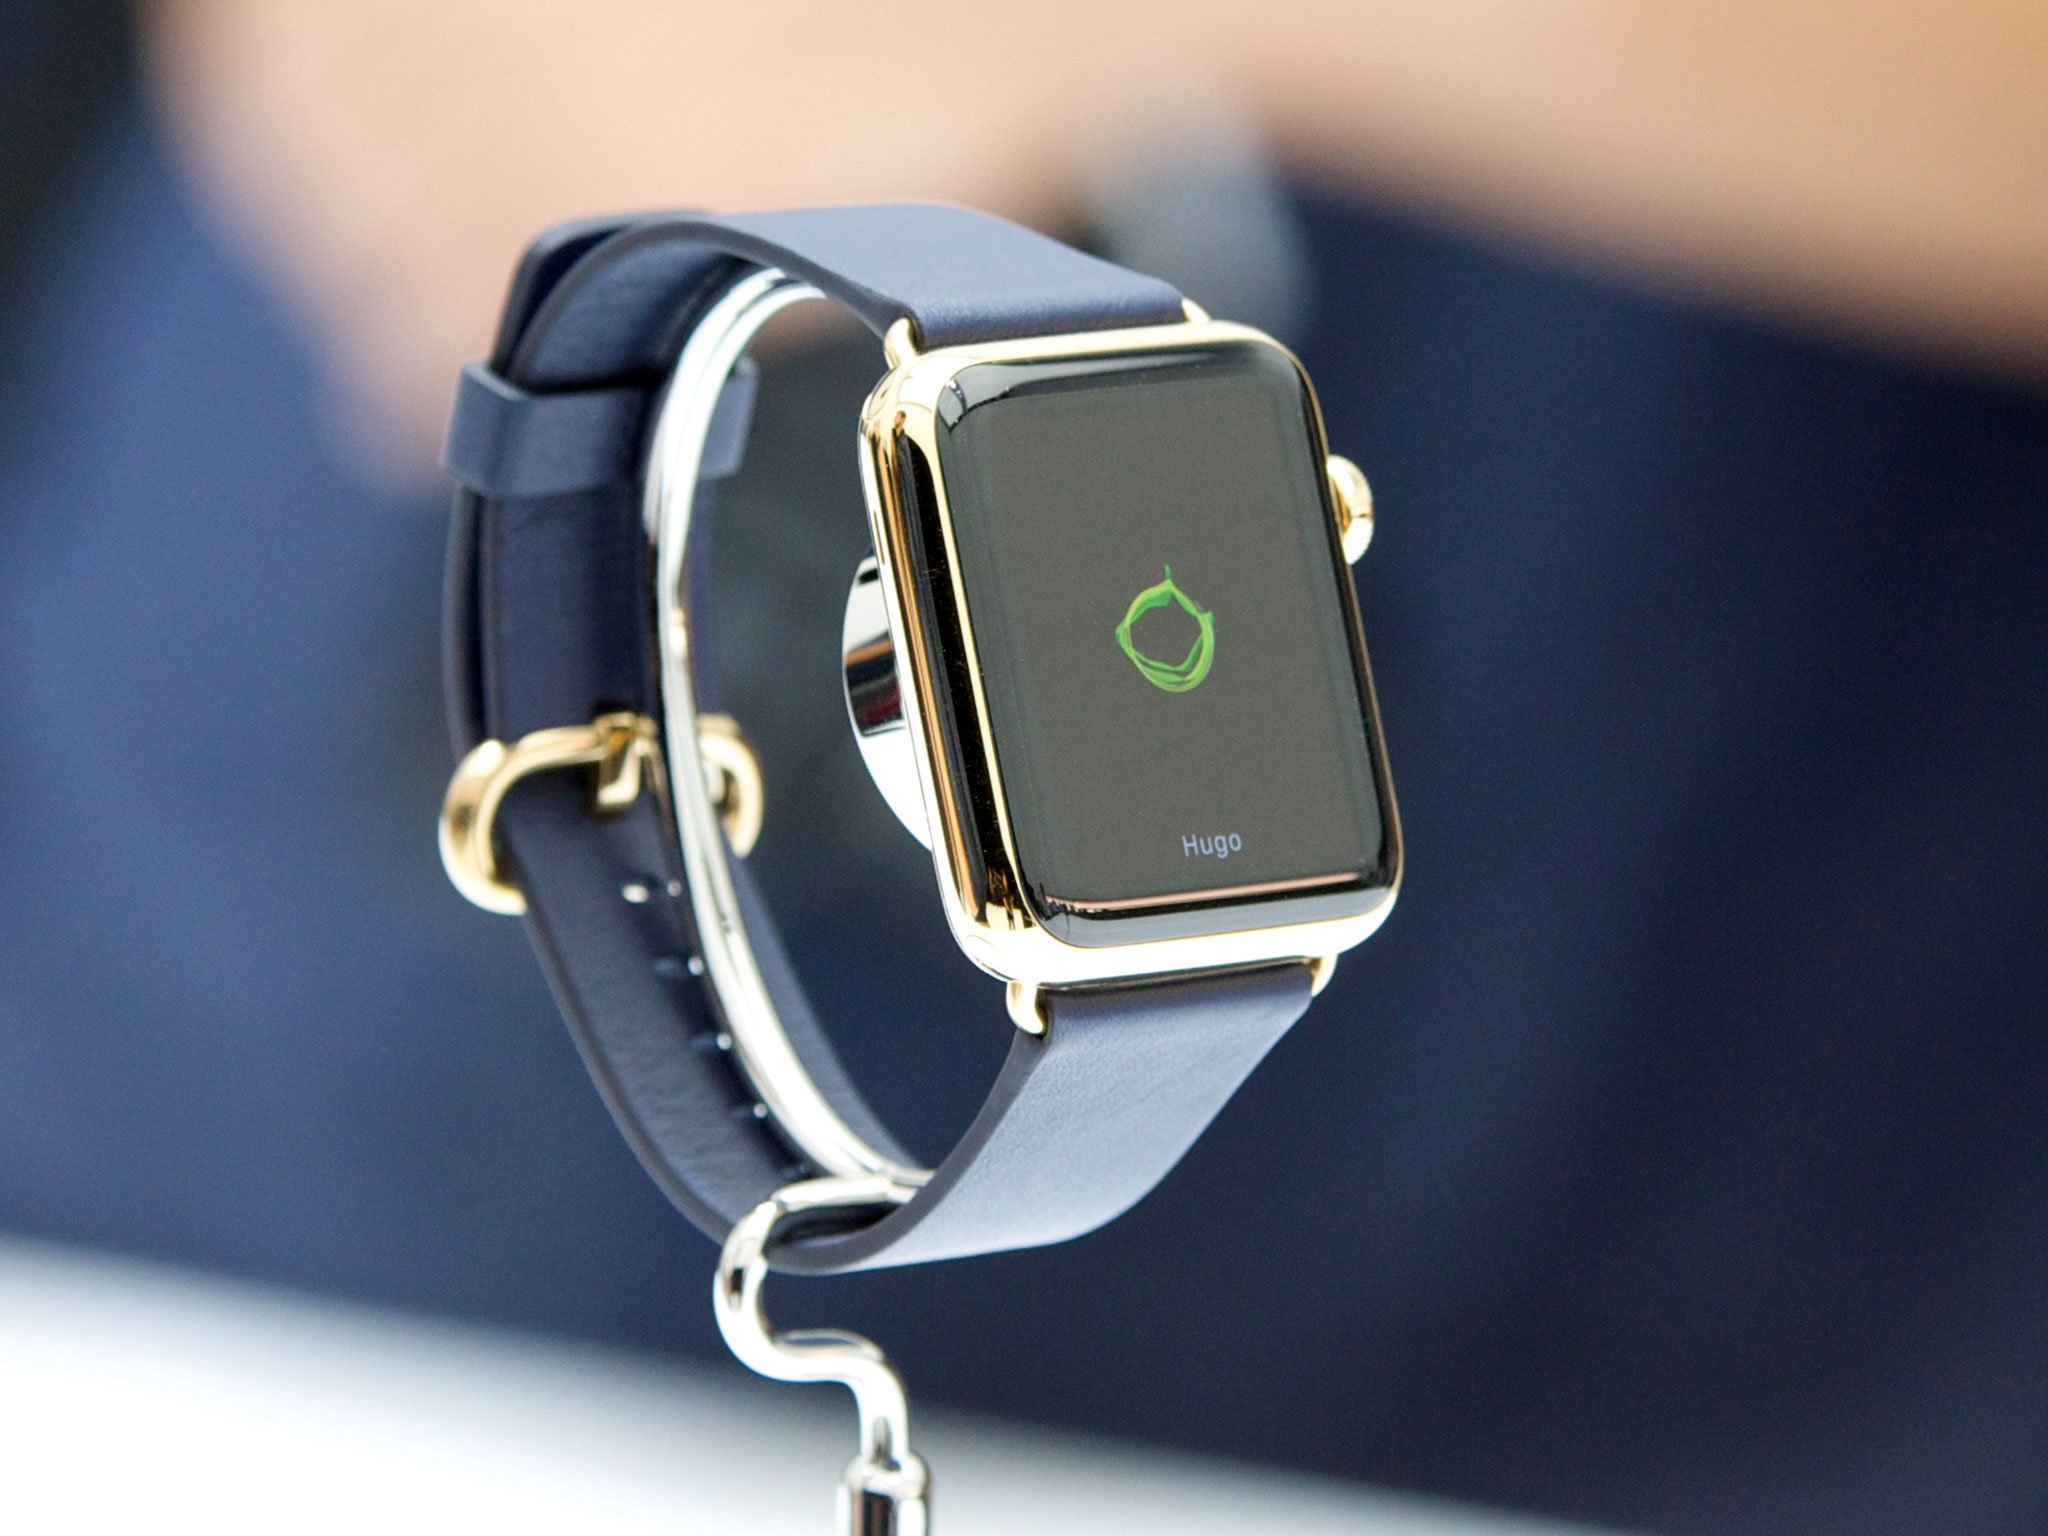 Touch ID, Apple Watch, and the future of projected authentication